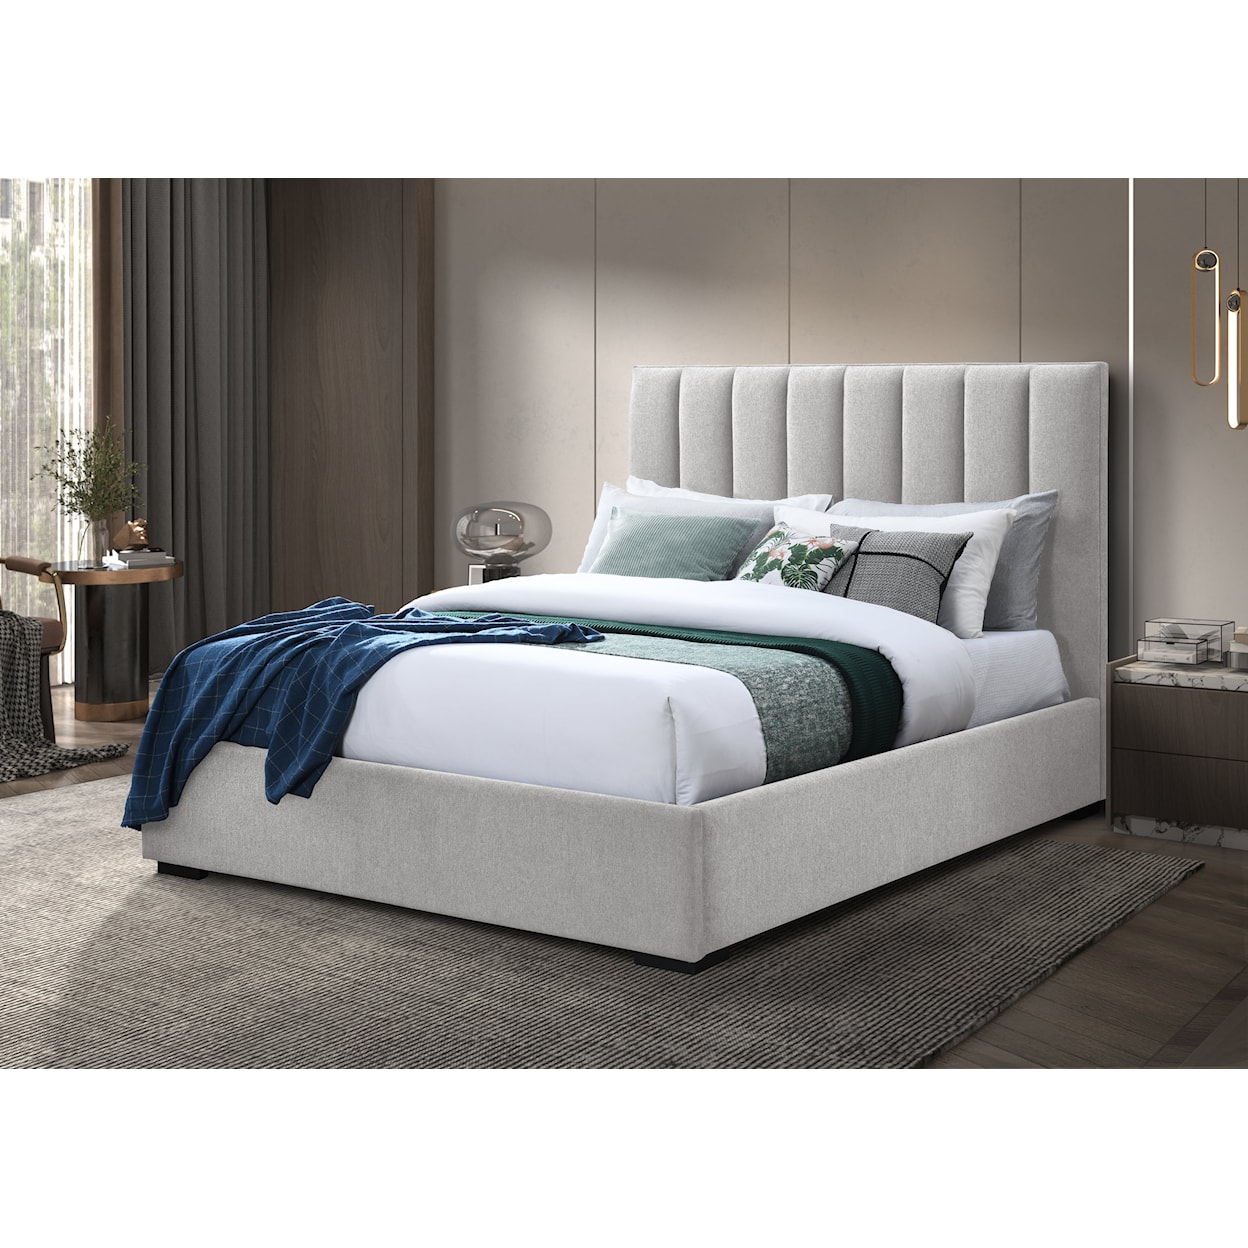 Lifestyle 9432A Upholstered Bed - Queen